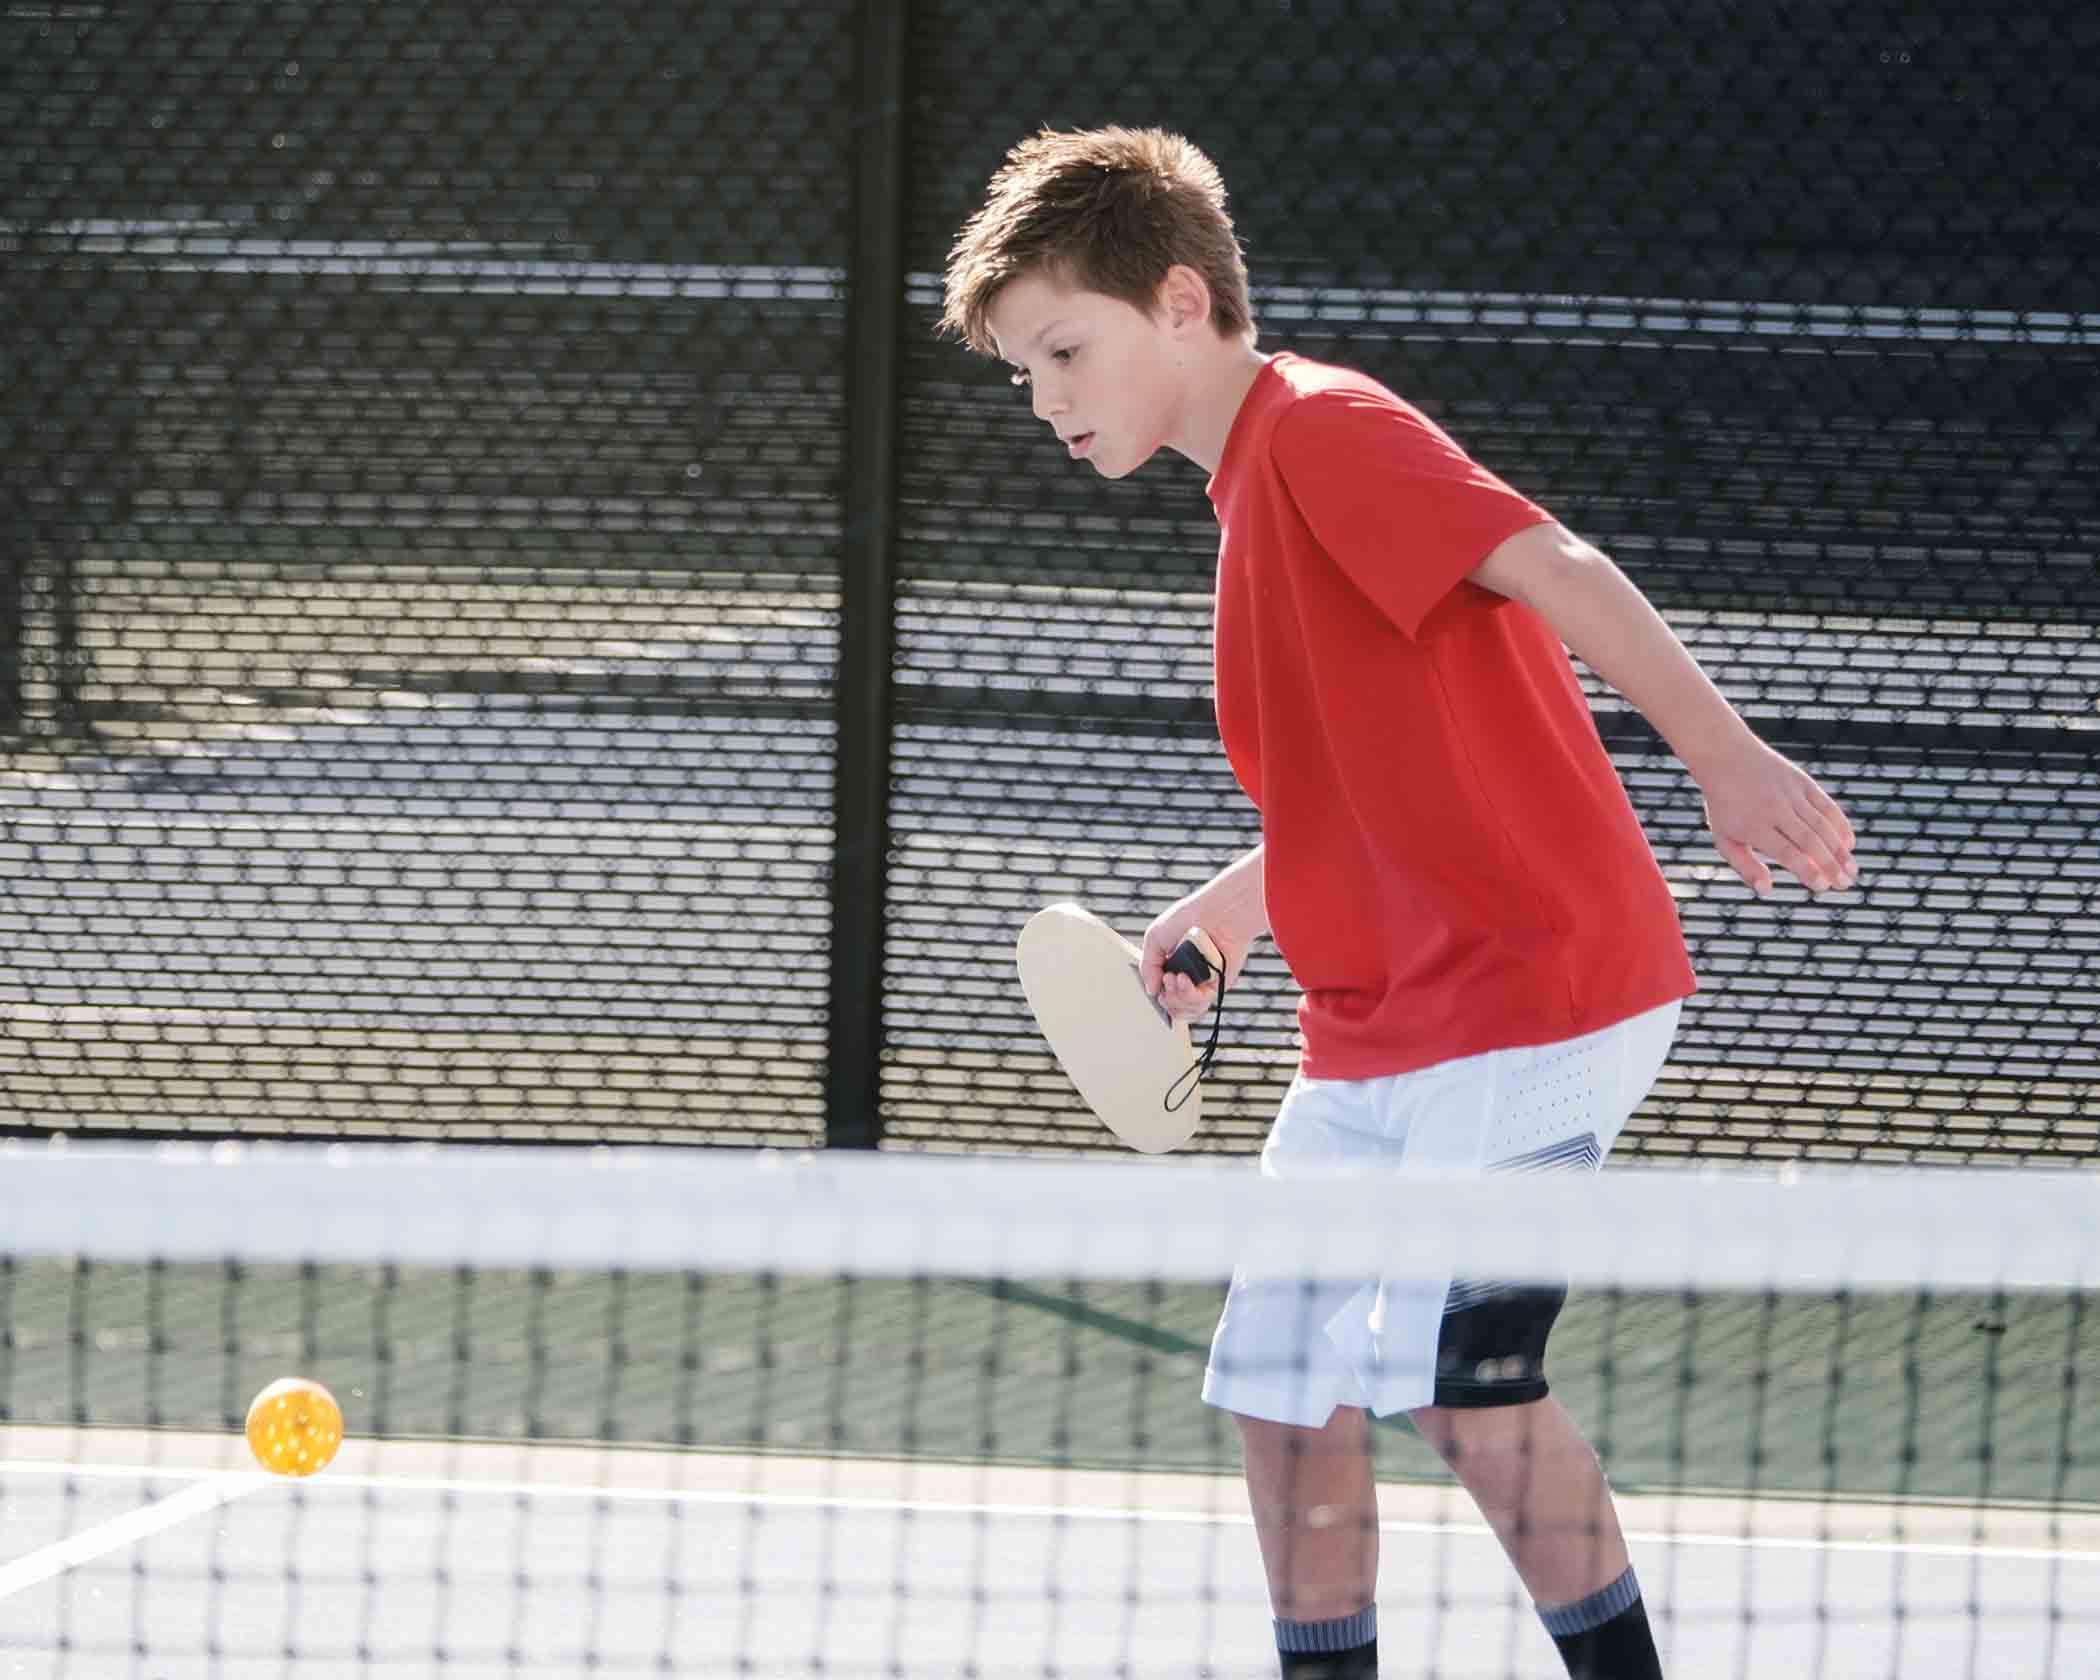 Young boy playing pickleball